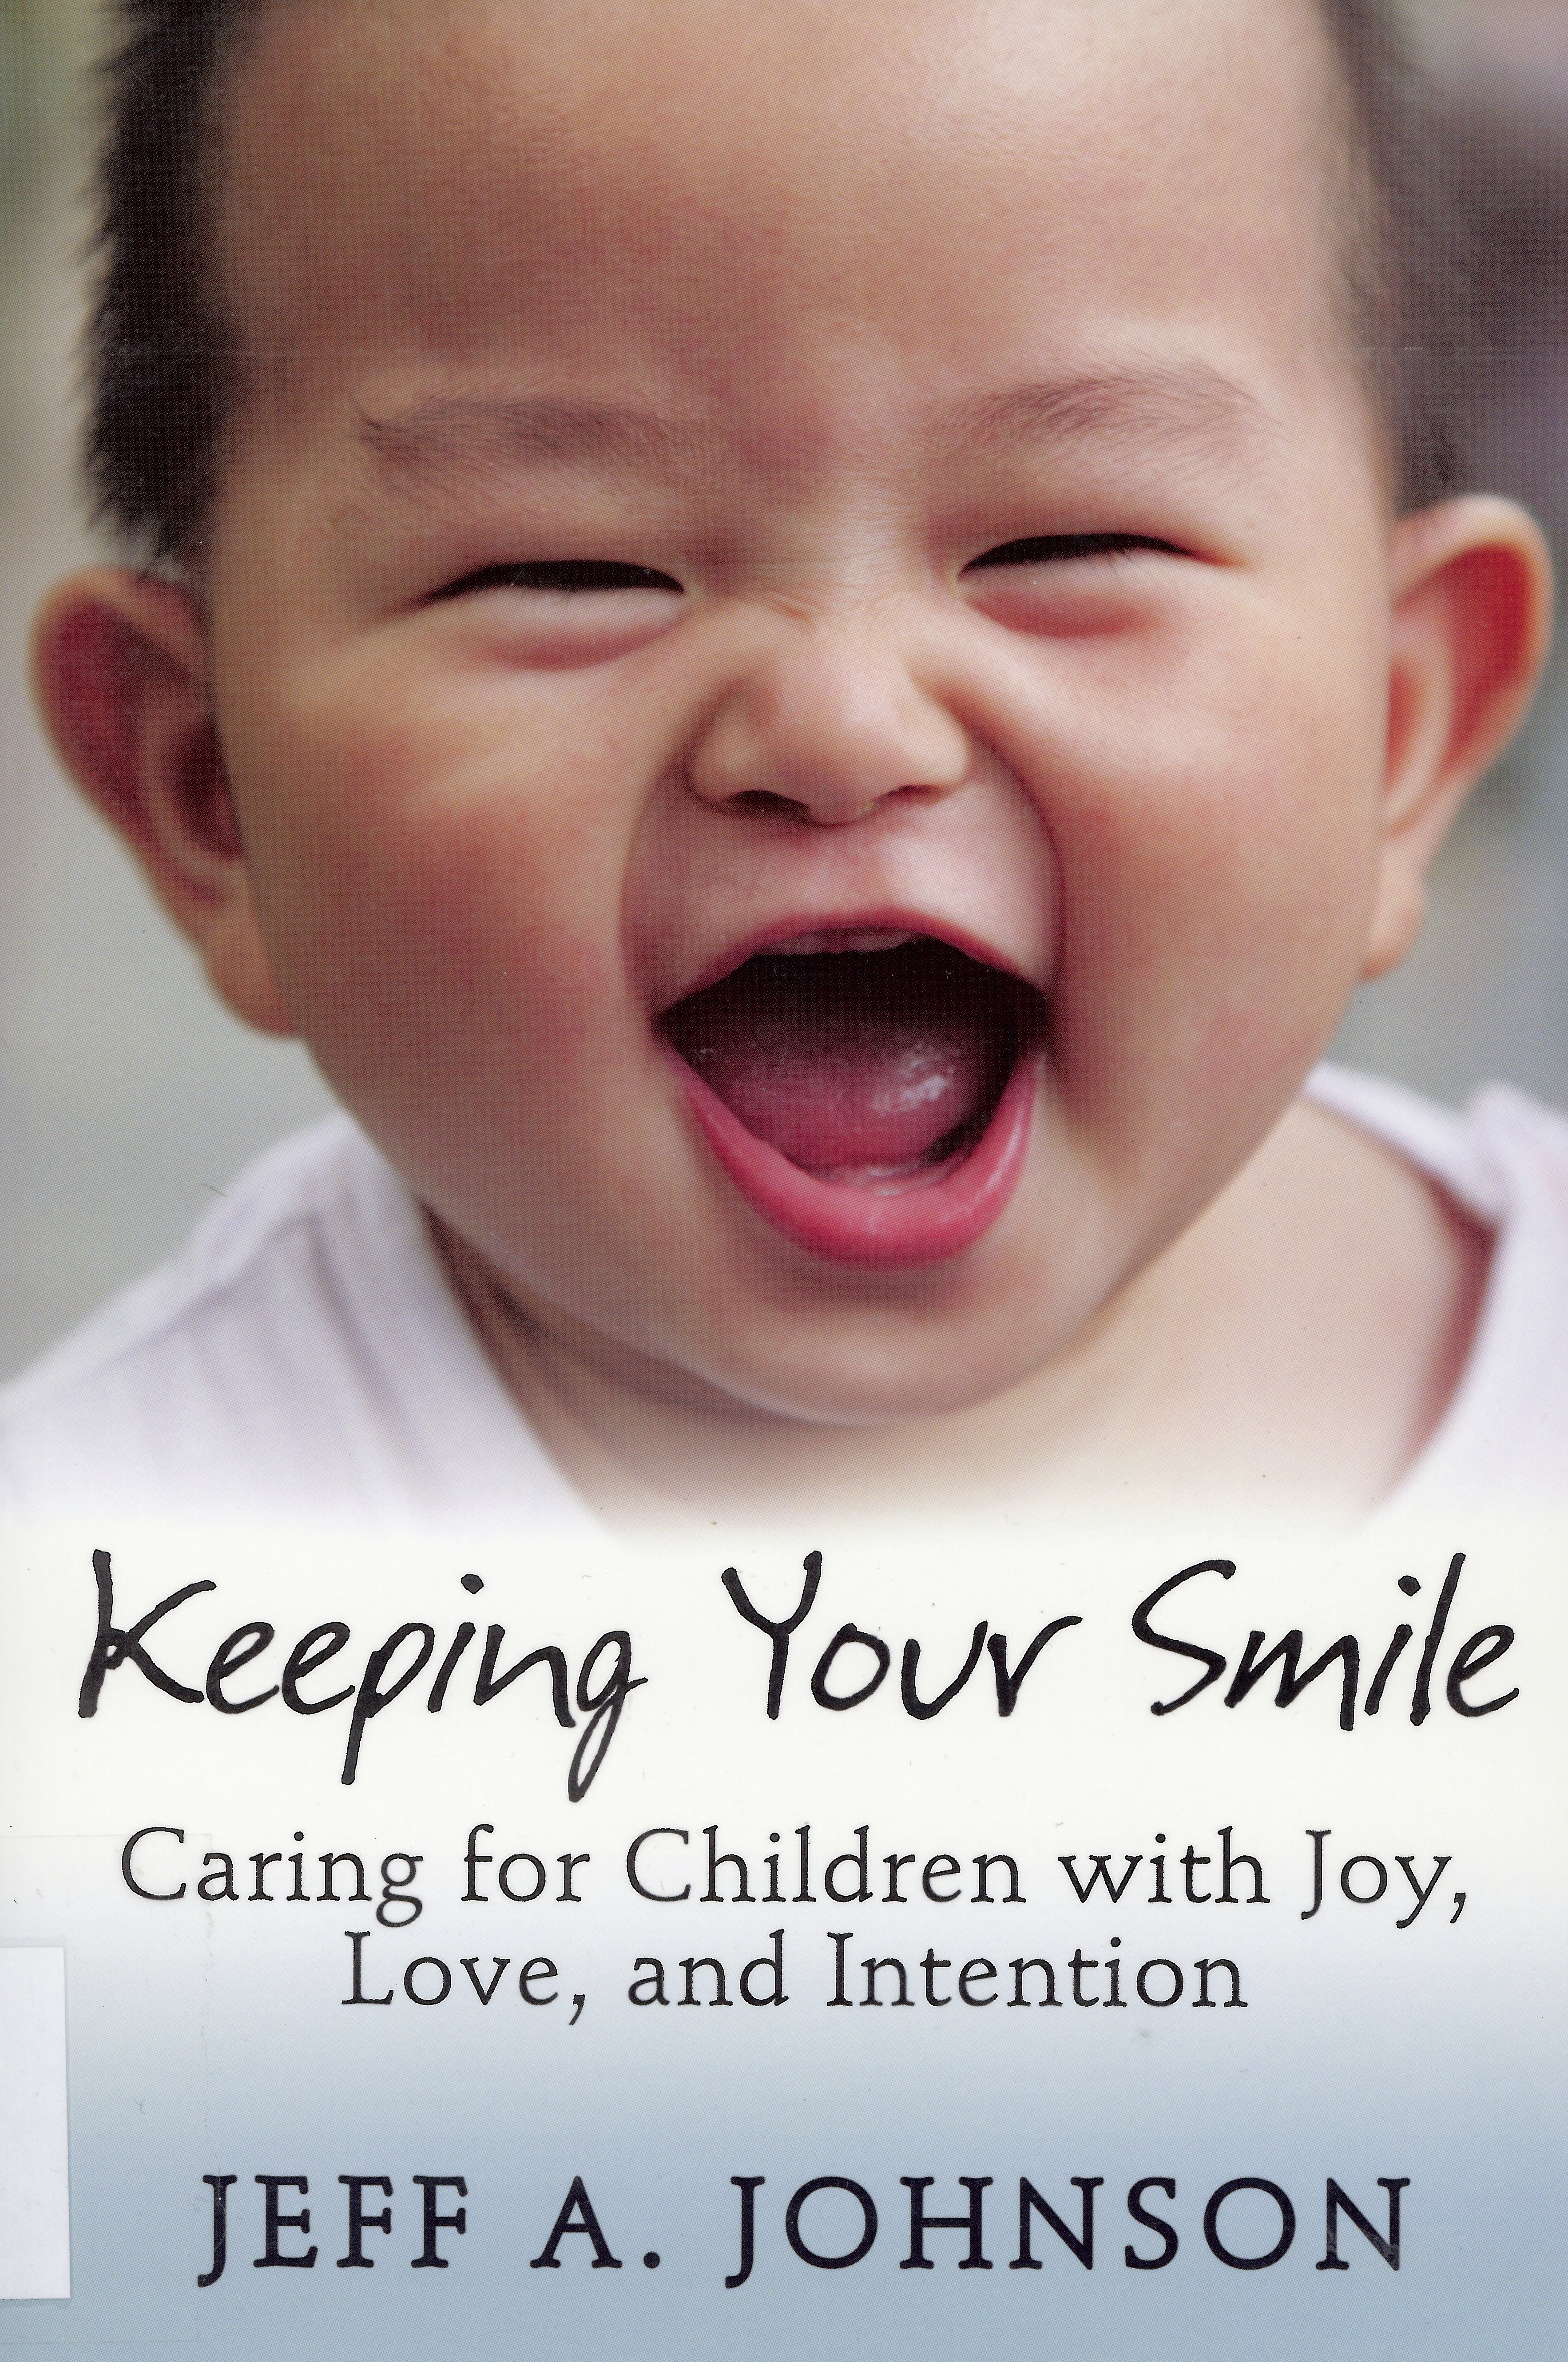 Keeping your smile : caring for children with joy, love, and intention